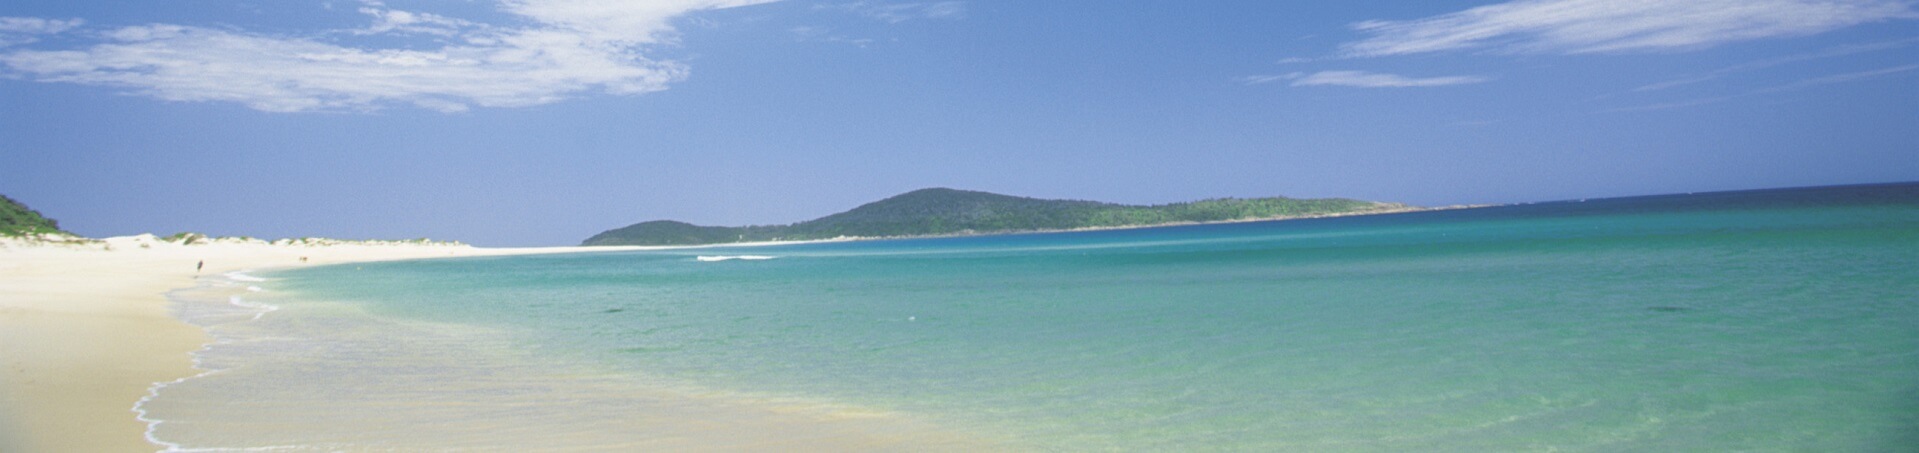 What is Port Stephens known for?